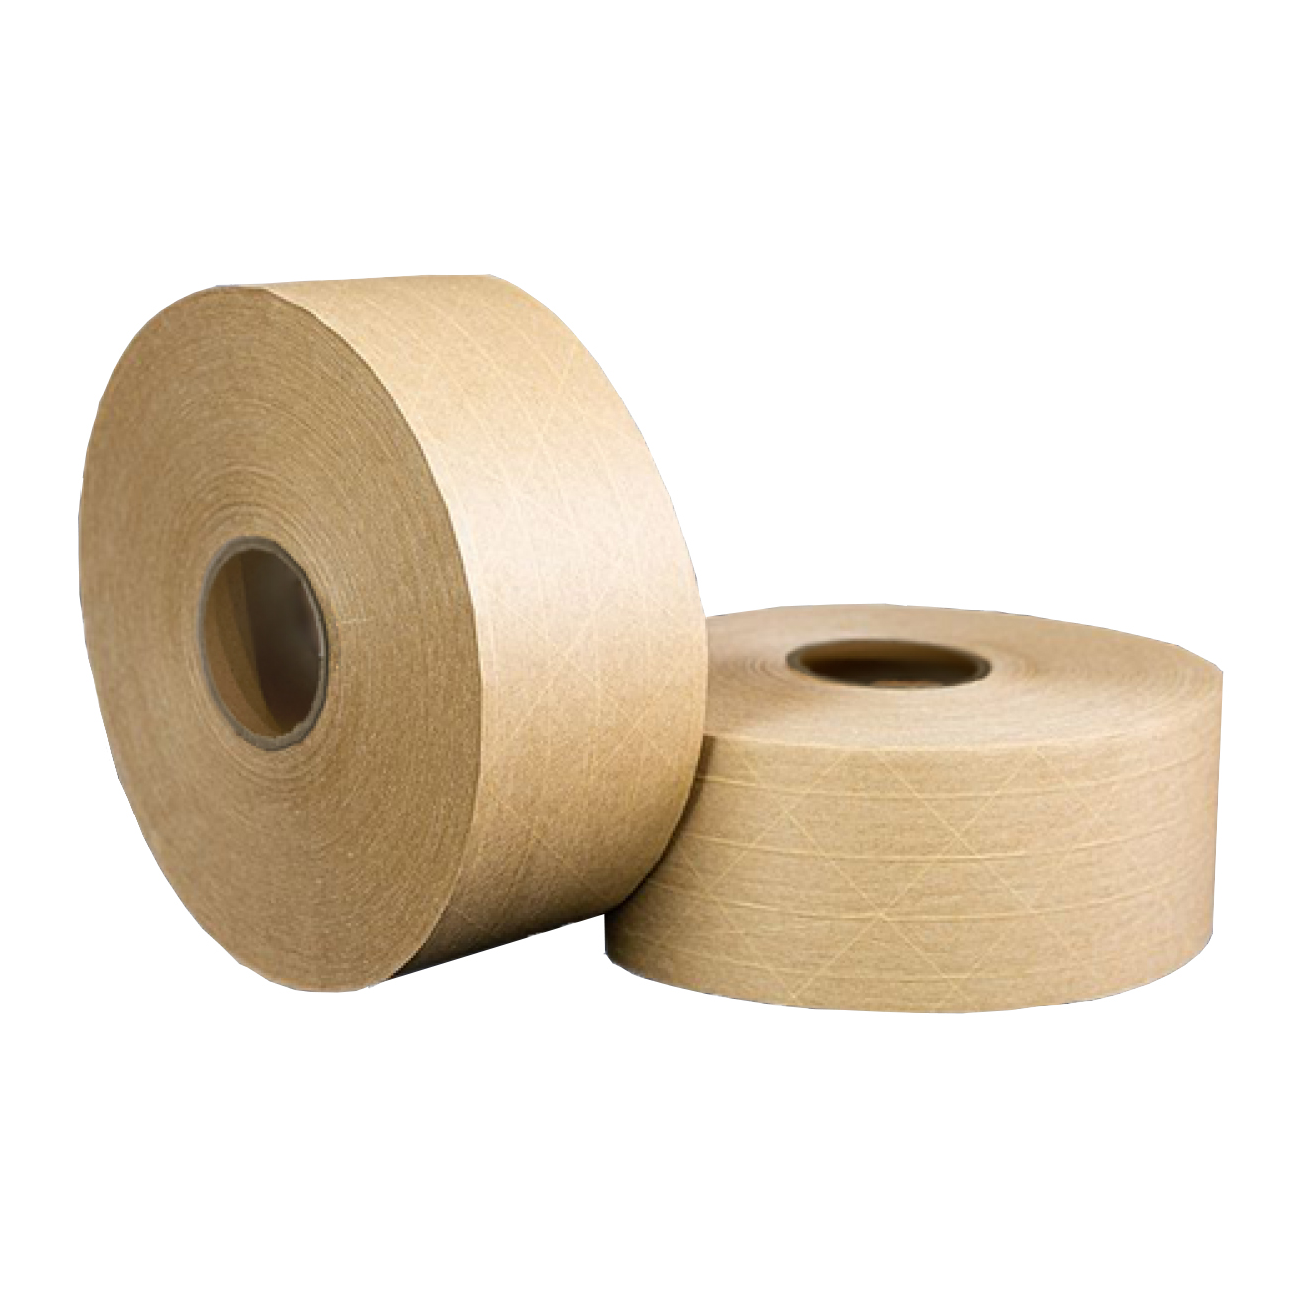 3-WAT 3" x 450 Foot Roll of Reinforced Water Activated Carton Sealing Tape - Case of 10 rolls